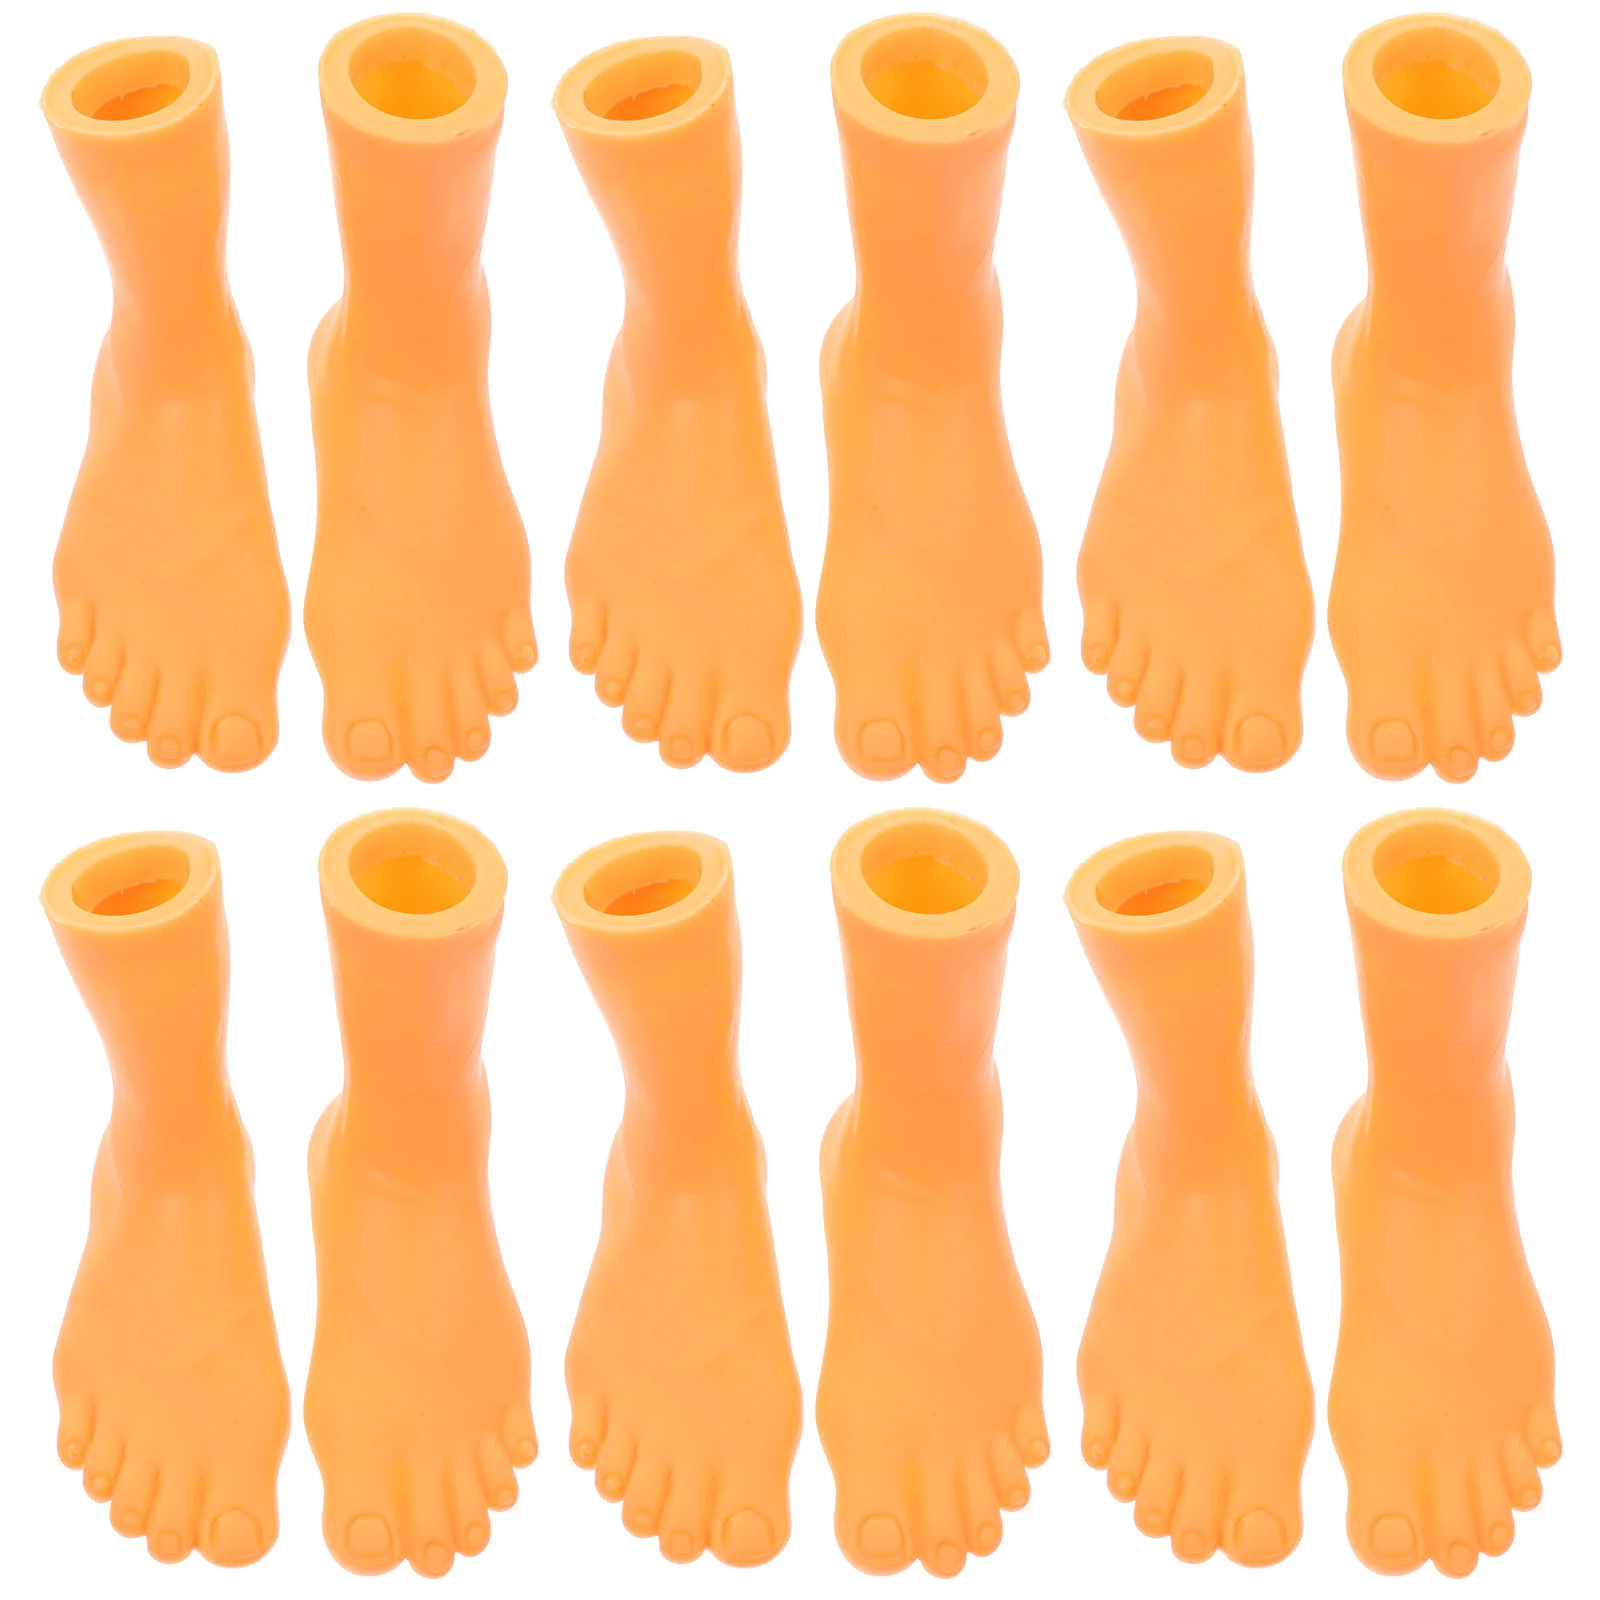 

6 Pairs Finger Booties Foot Puppet Kids Tiny Puppets Props Model Vinyl Baby Creative Interactive